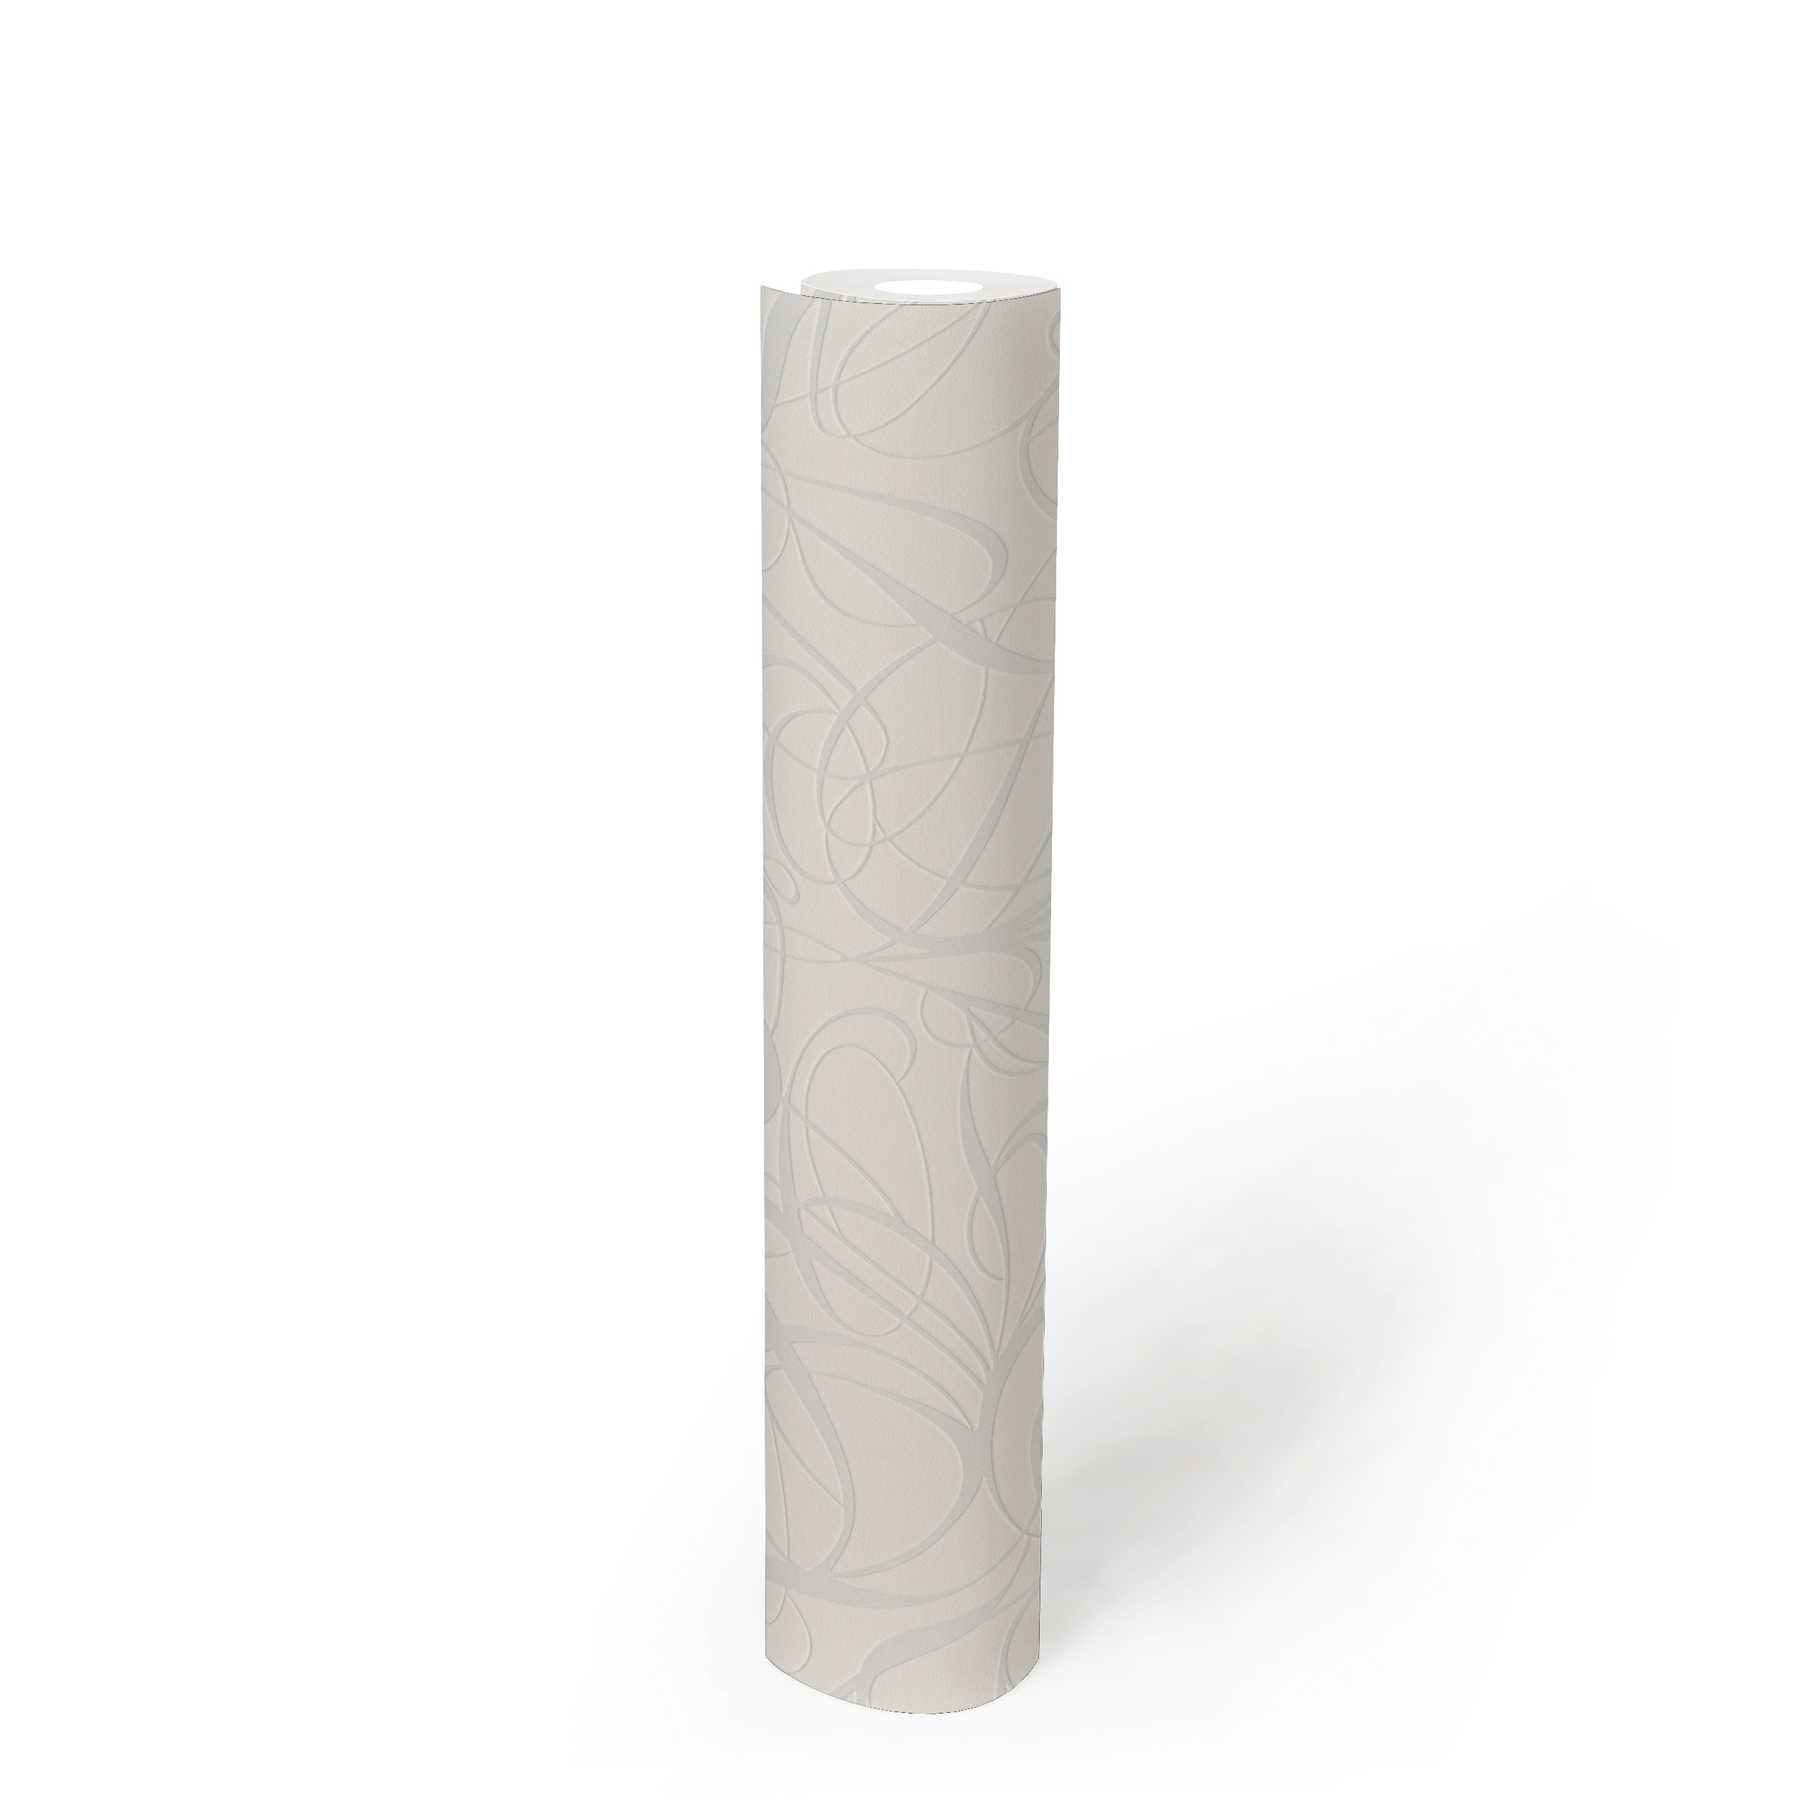             Non-woven wallpaper line pattern and glossy effect - white, silver
        